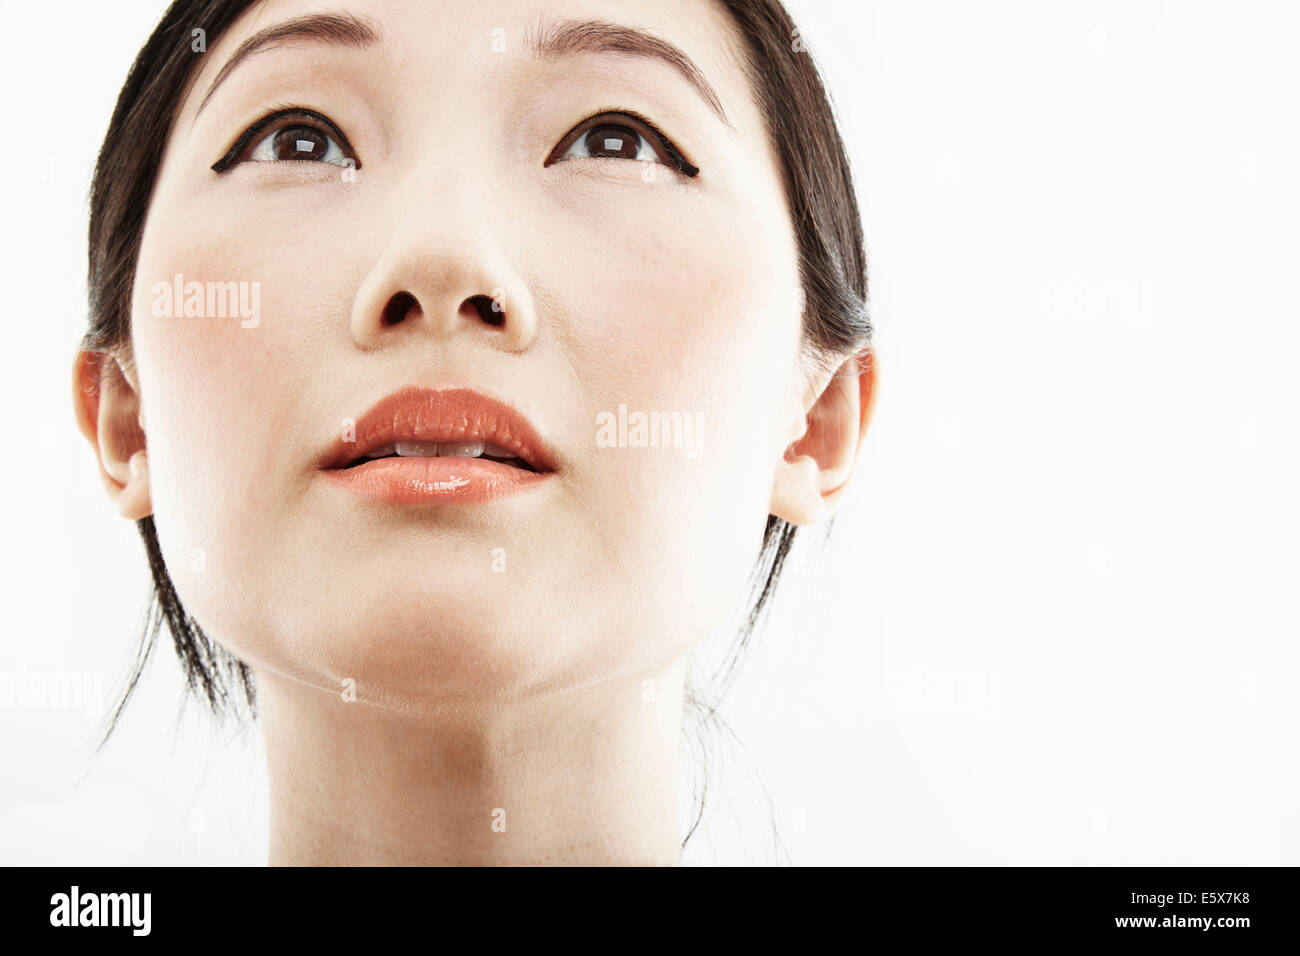 Close up studio portrait of young woman looking up Stock Photo - Alamy